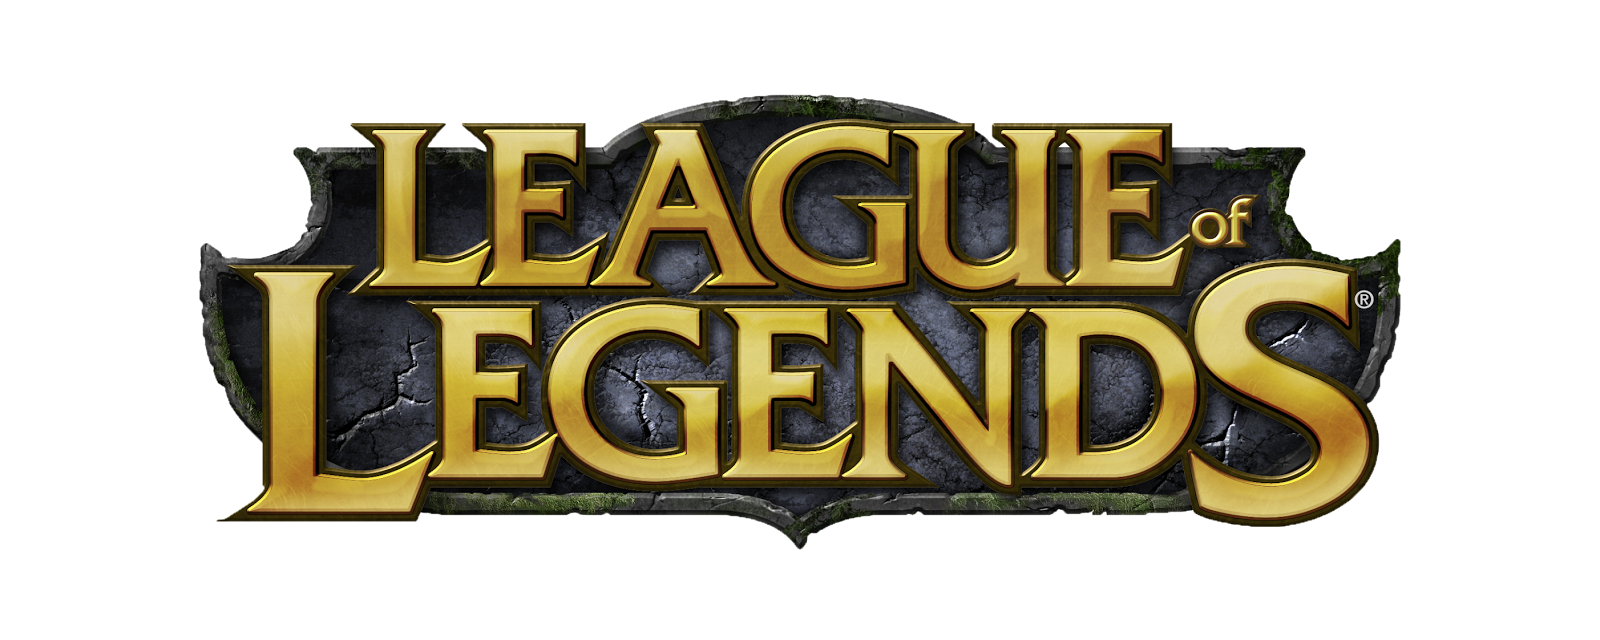 League Legends Text Yellow Game Of Logo PNG Image